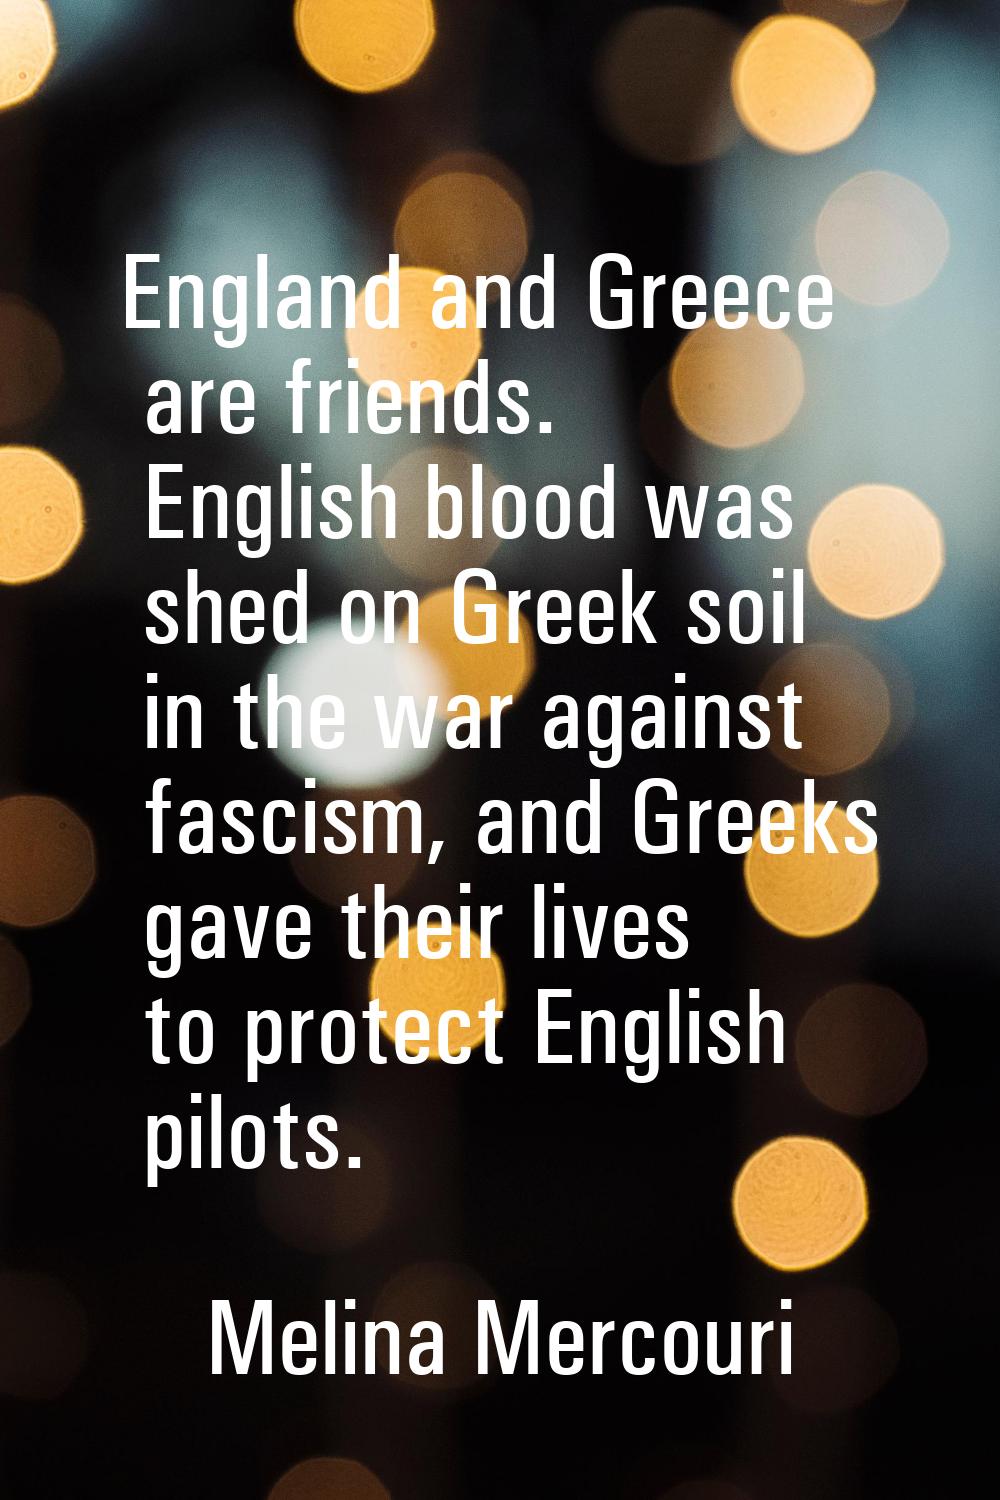 England and Greece are friends. English blood was shed on Greek soil in the war against fascism, an